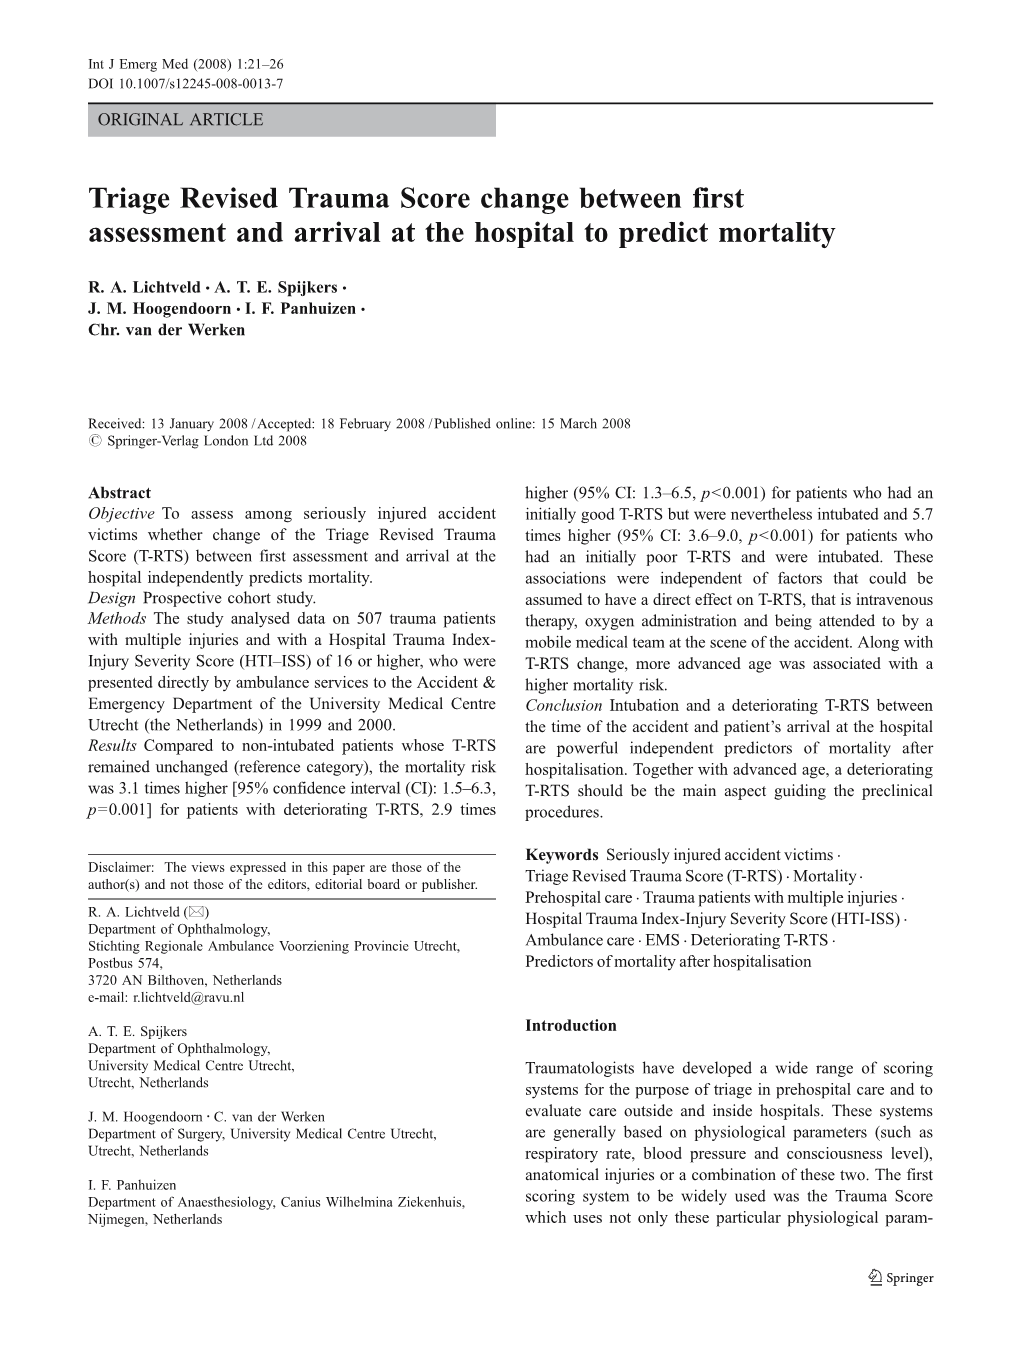 Triage Revised Trauma Score Change Between First Assessment and Arrival at the Hospital to Predict Mortality